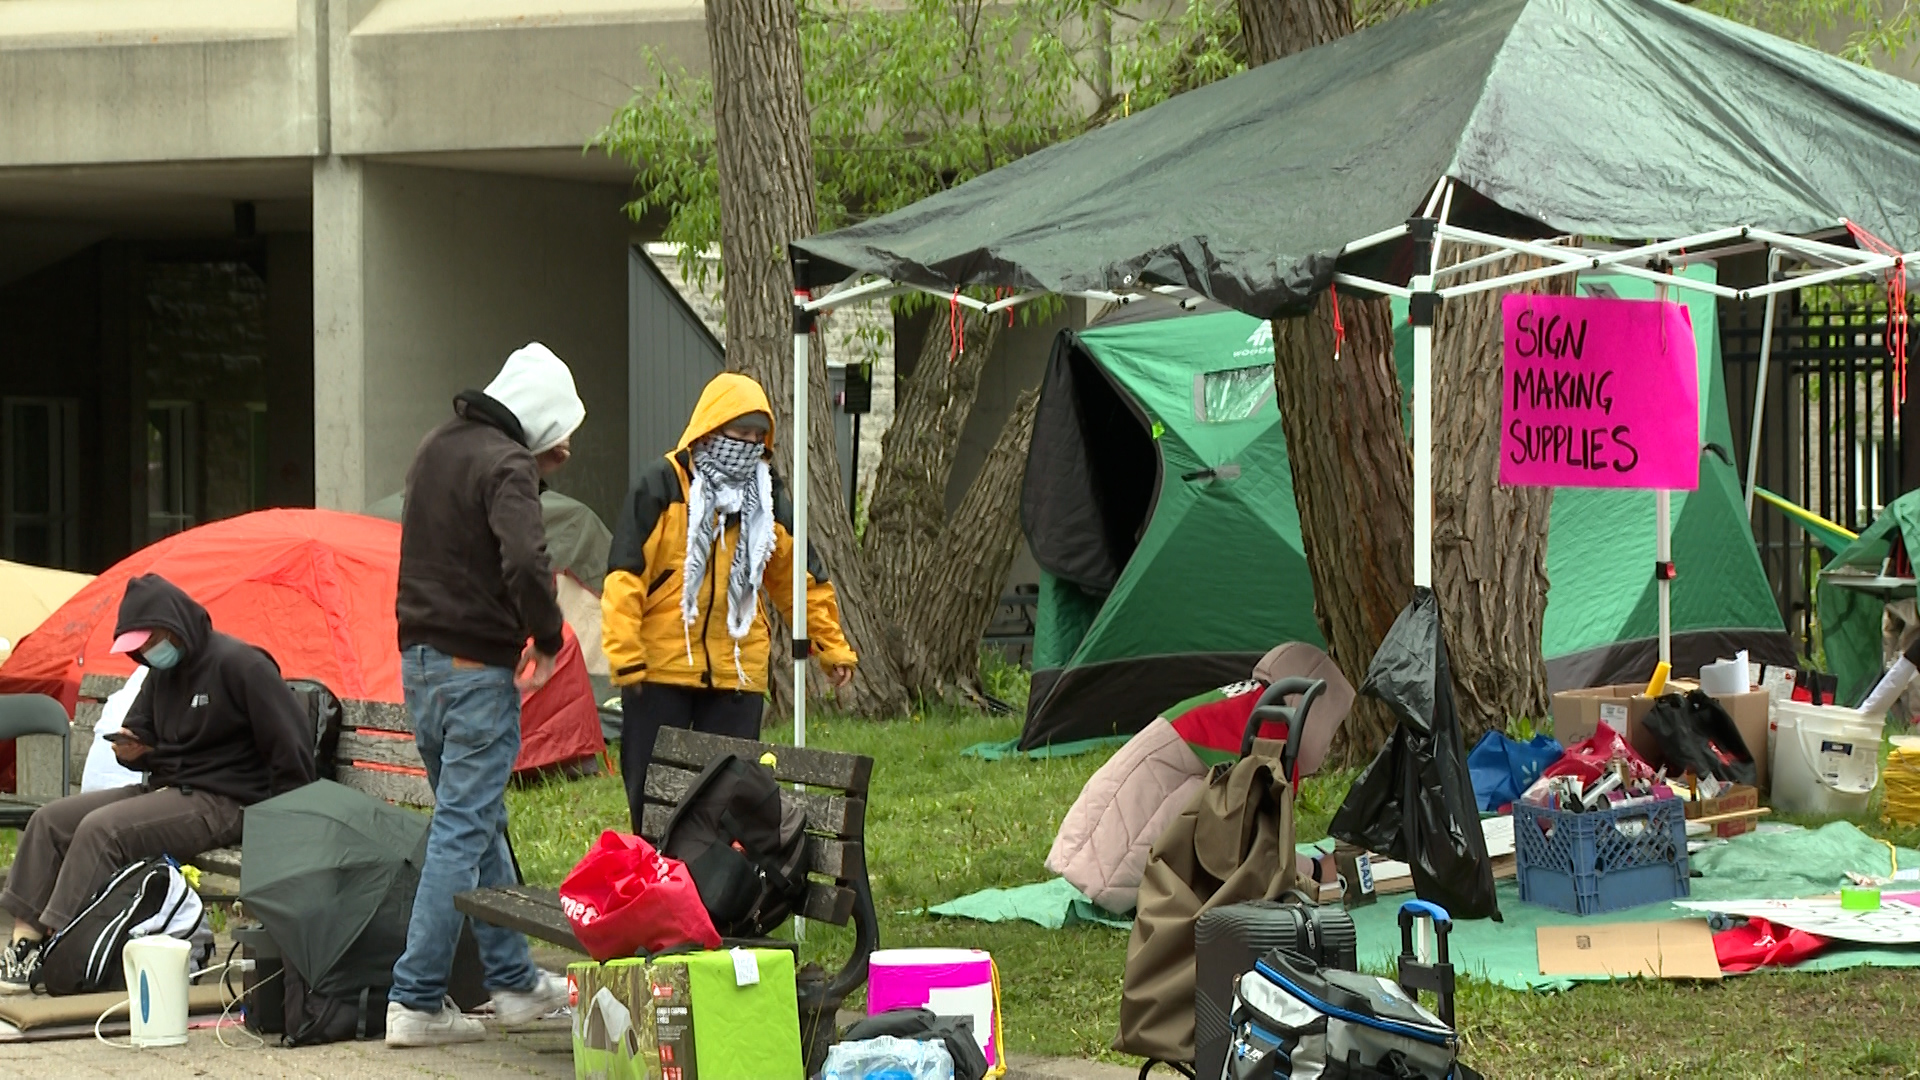 Protesters set up pro-Palestinian encampment at Queen’s University in Kingston